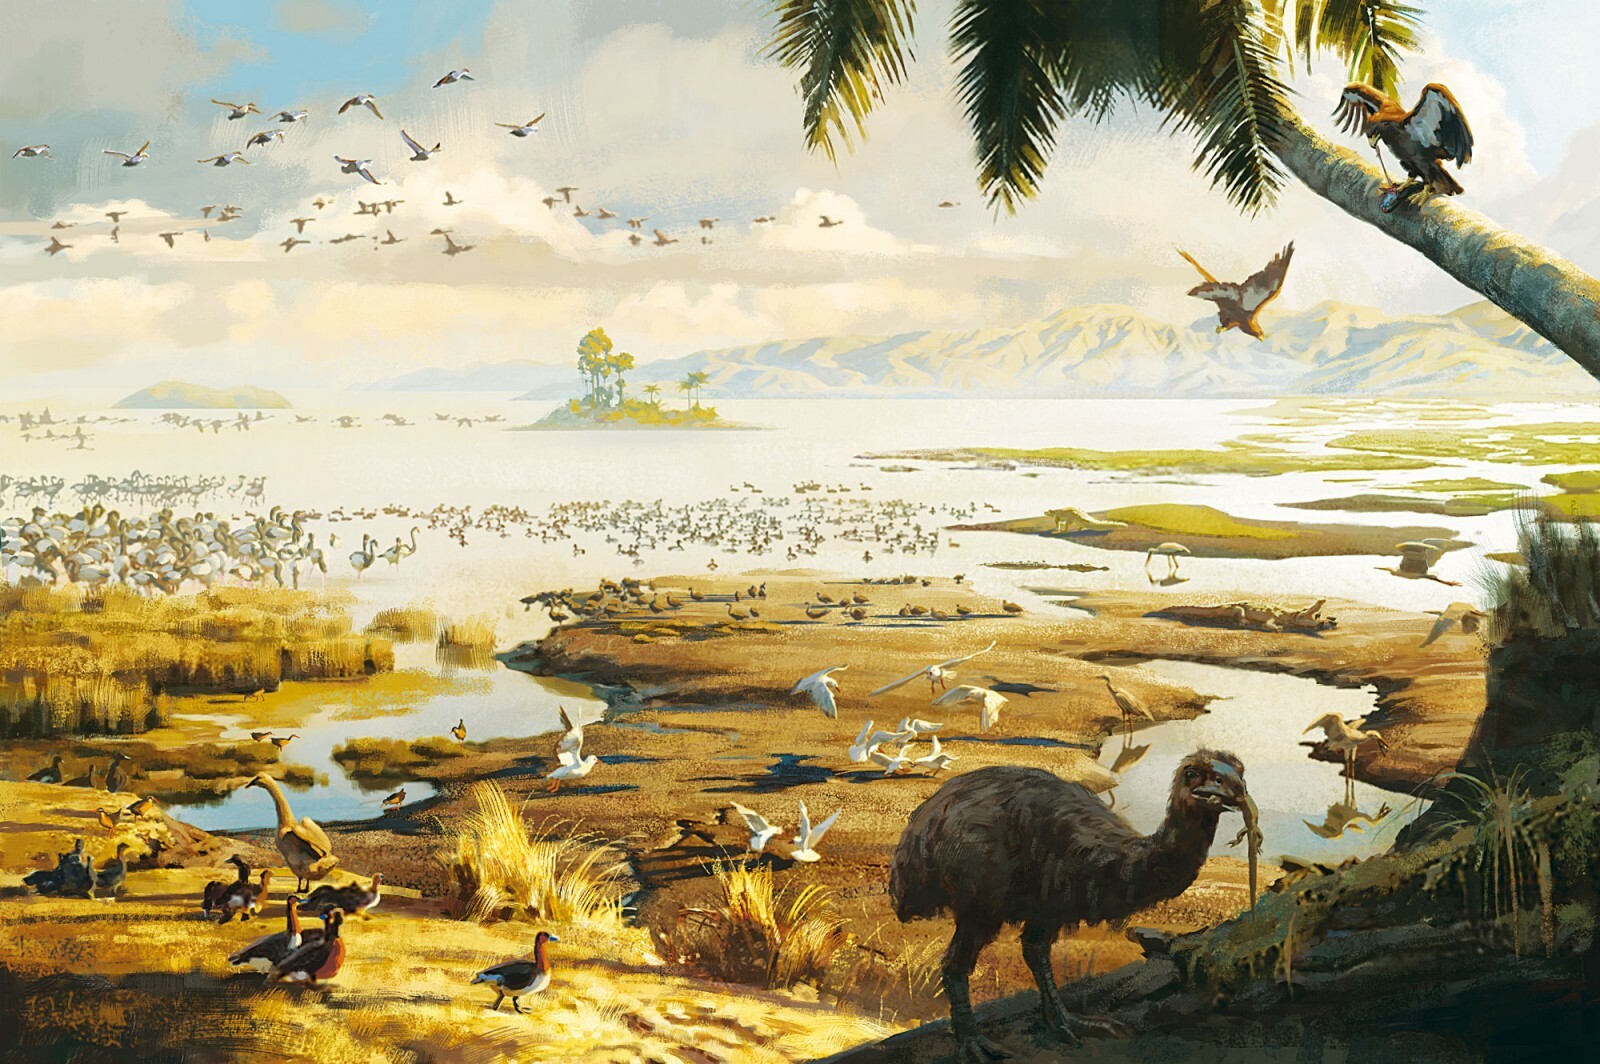 An artist's impression of the landscape around Lake Manuherikia in the early Miocene. Illustration by Tom Simpson, All Rights Reserved